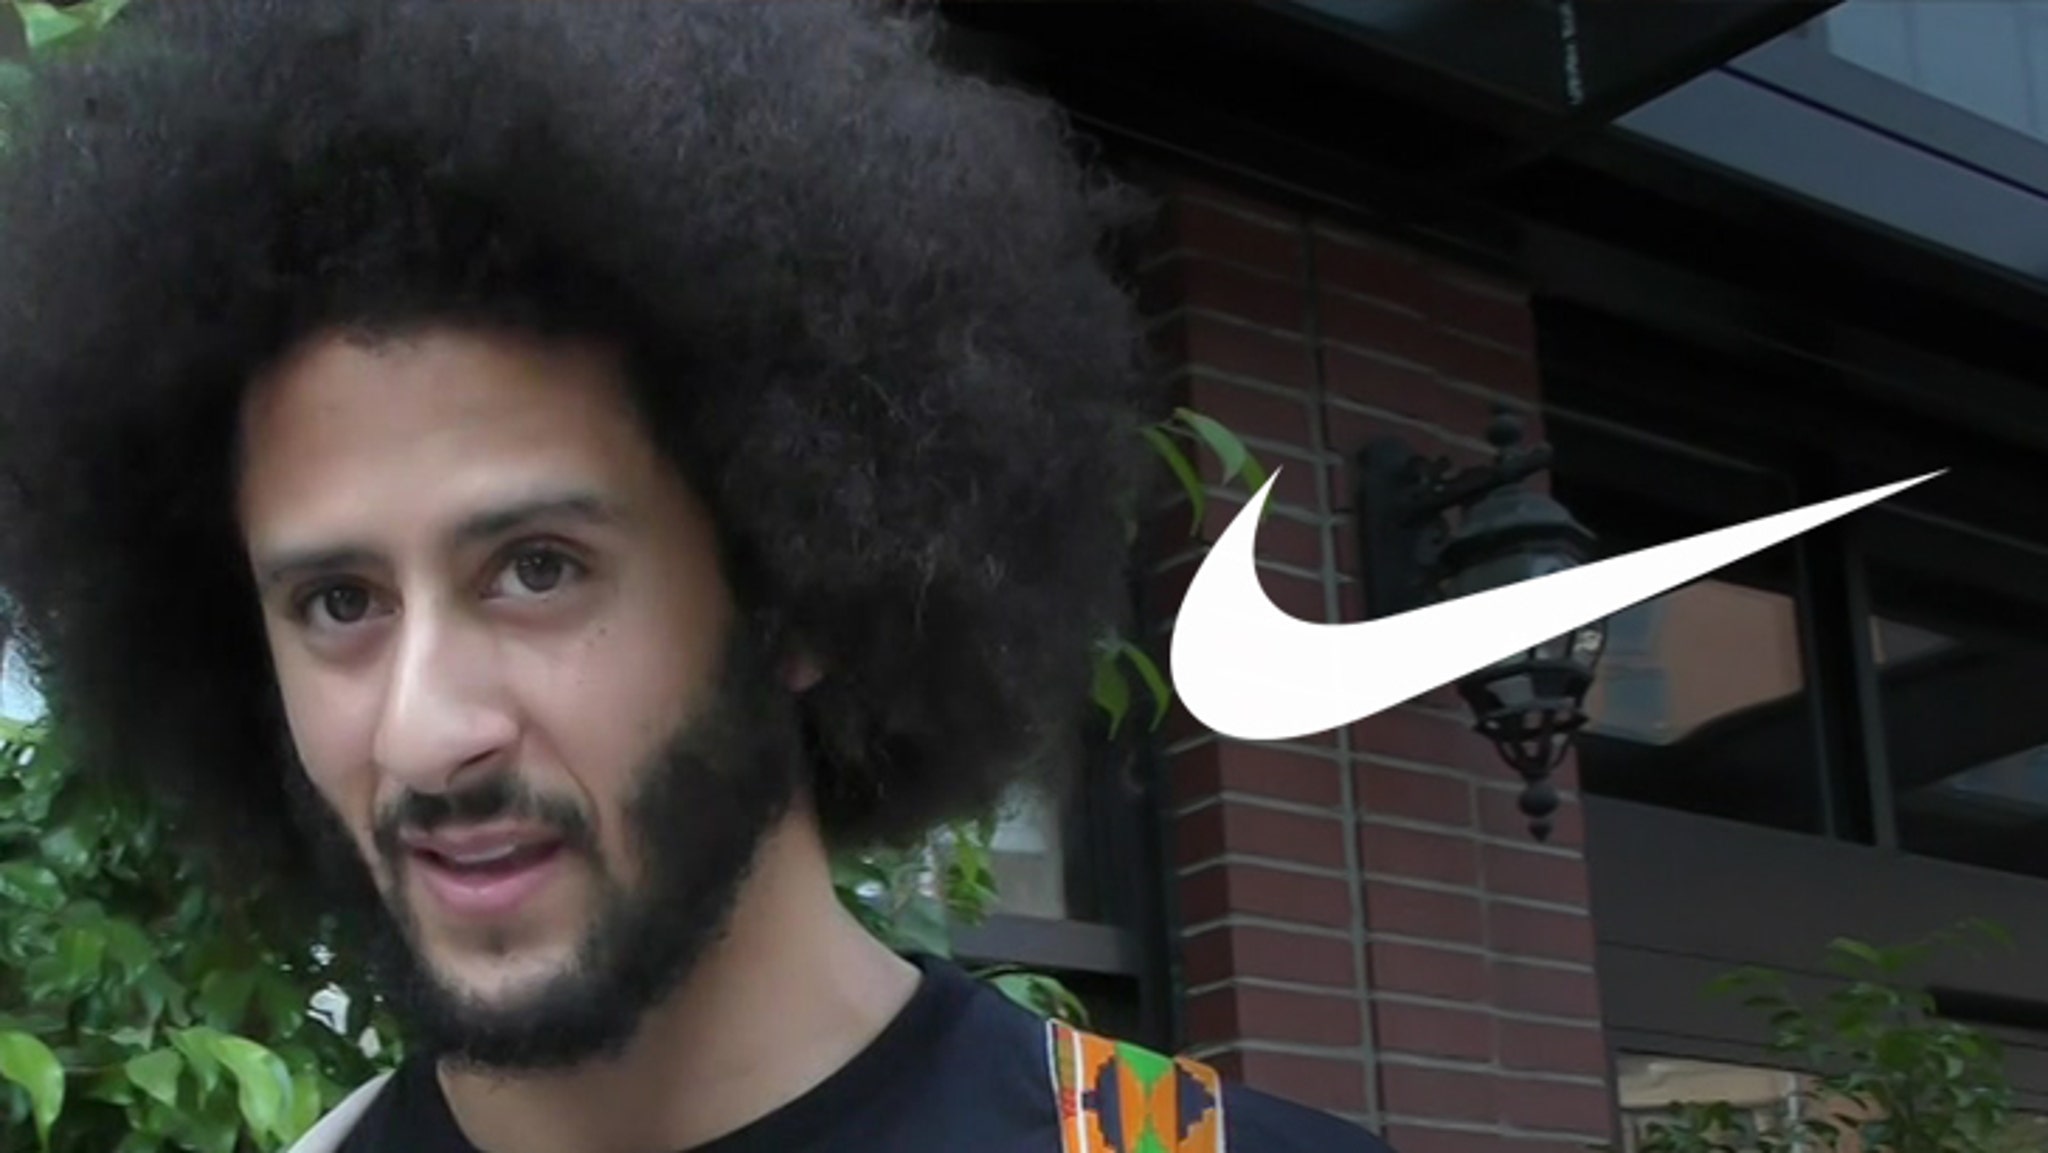 garrapata organizar milicia Nike's Decision to Back Colin Kaepernick Rooted in Social Change as Well as  Business